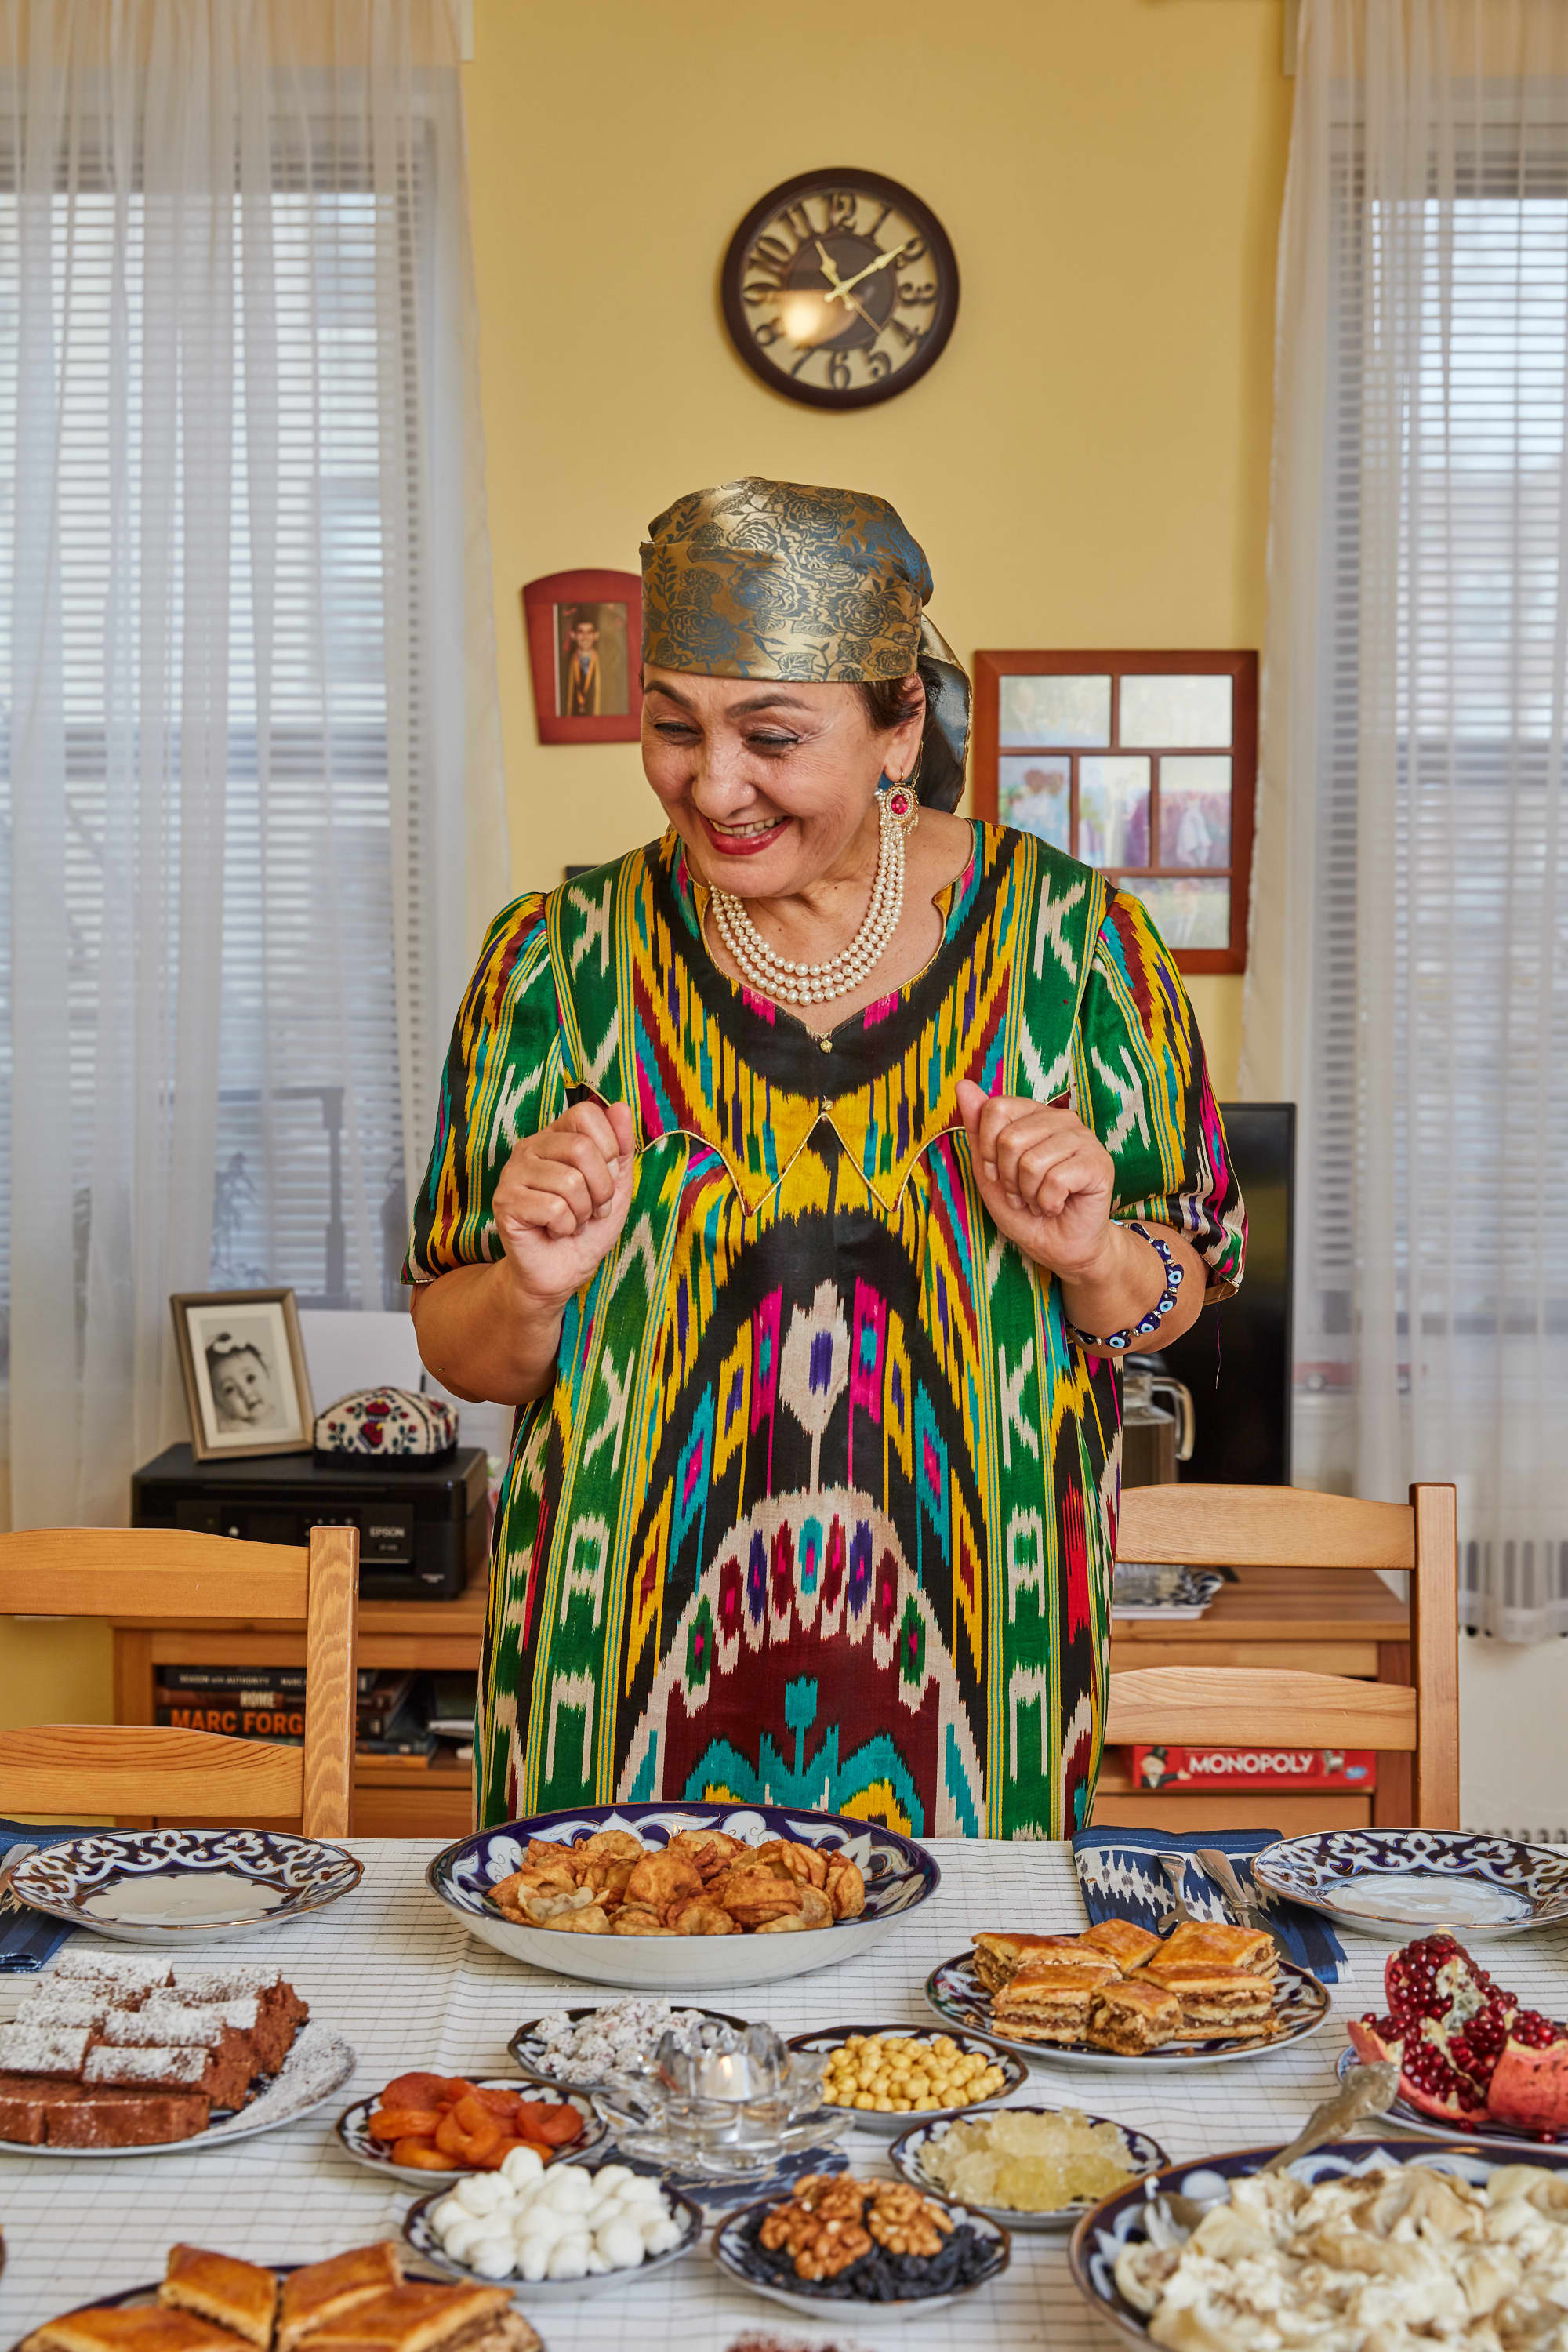 Uzbek Cooking Traditions | Kitchn The